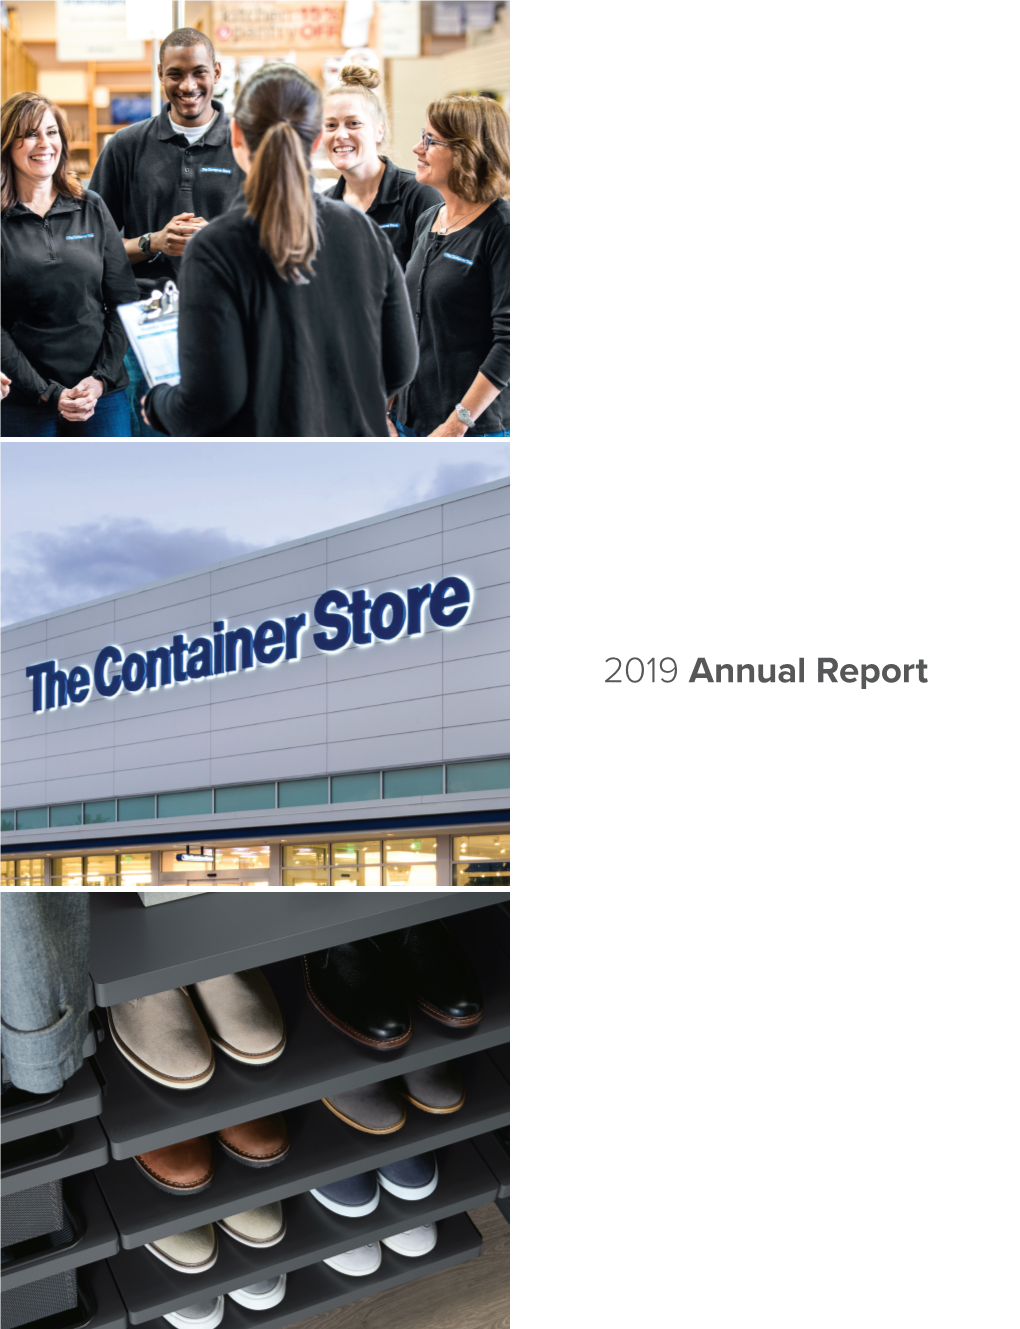 The Container Store’S Accomplishments in Fiscal 2019 and Assess Our Strategic Priorities for Fiscal 2020, It Is Striking How Much Has Changed in Just a Few Months